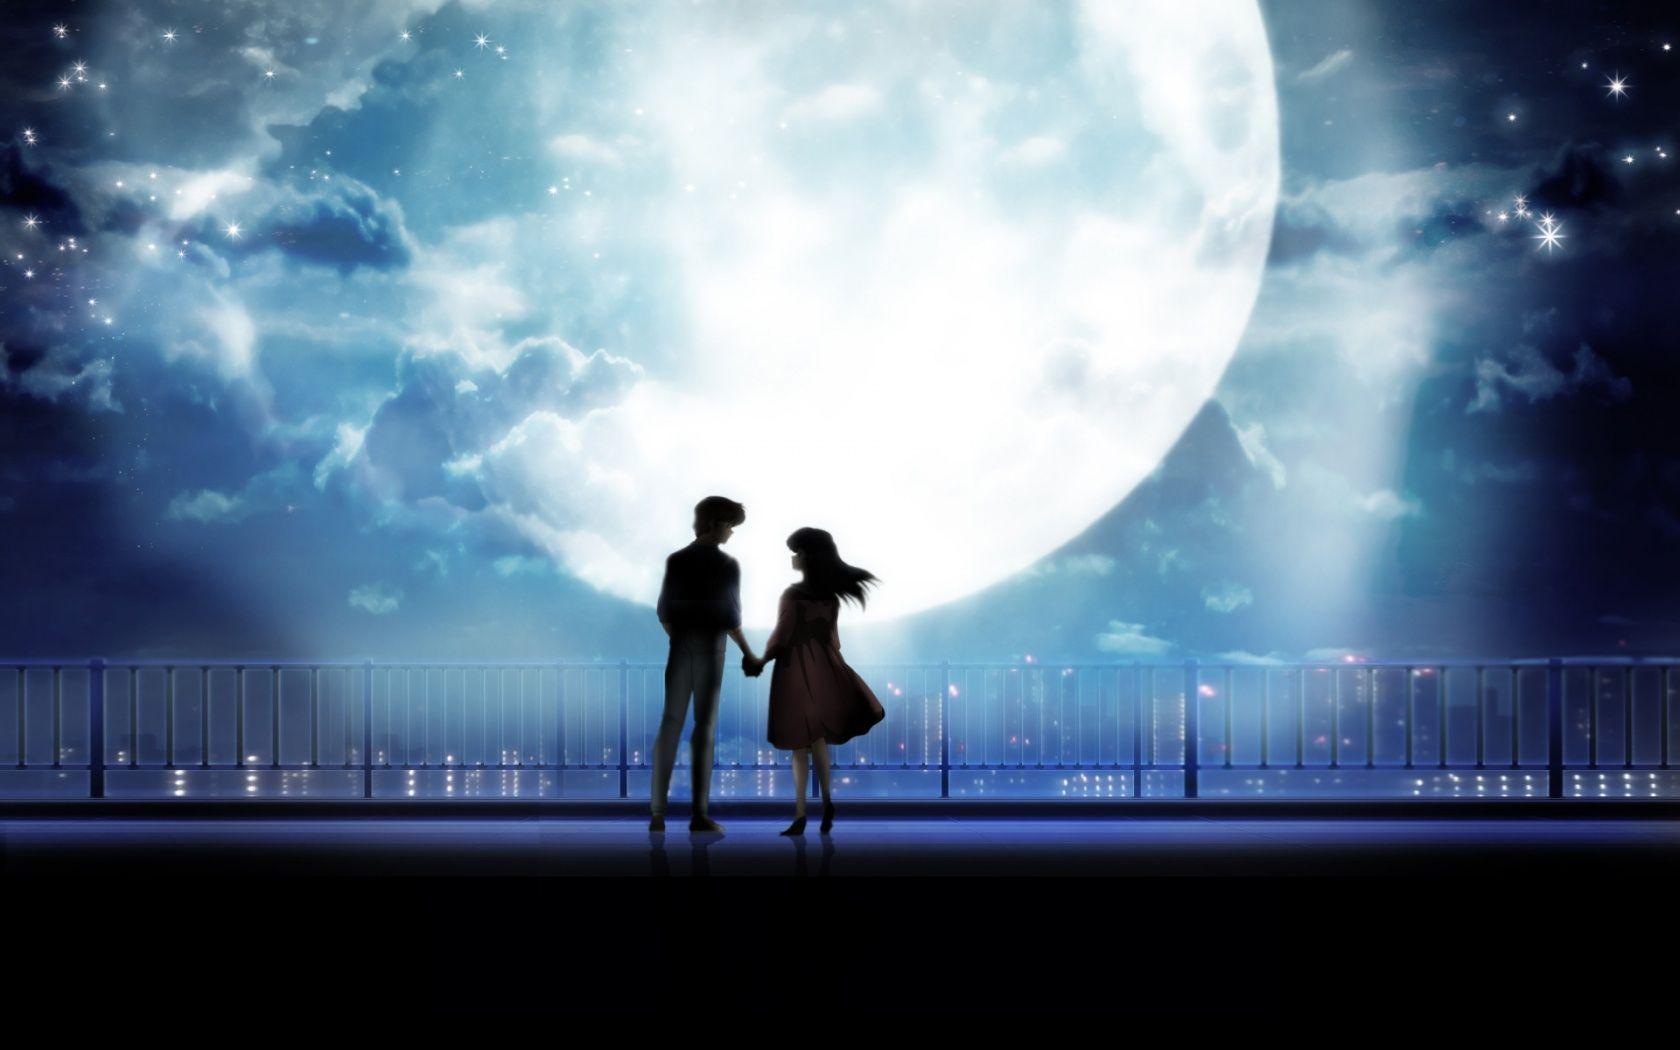 Holding Hands Romantic Anime Wallpapers Top Free Holding Hands